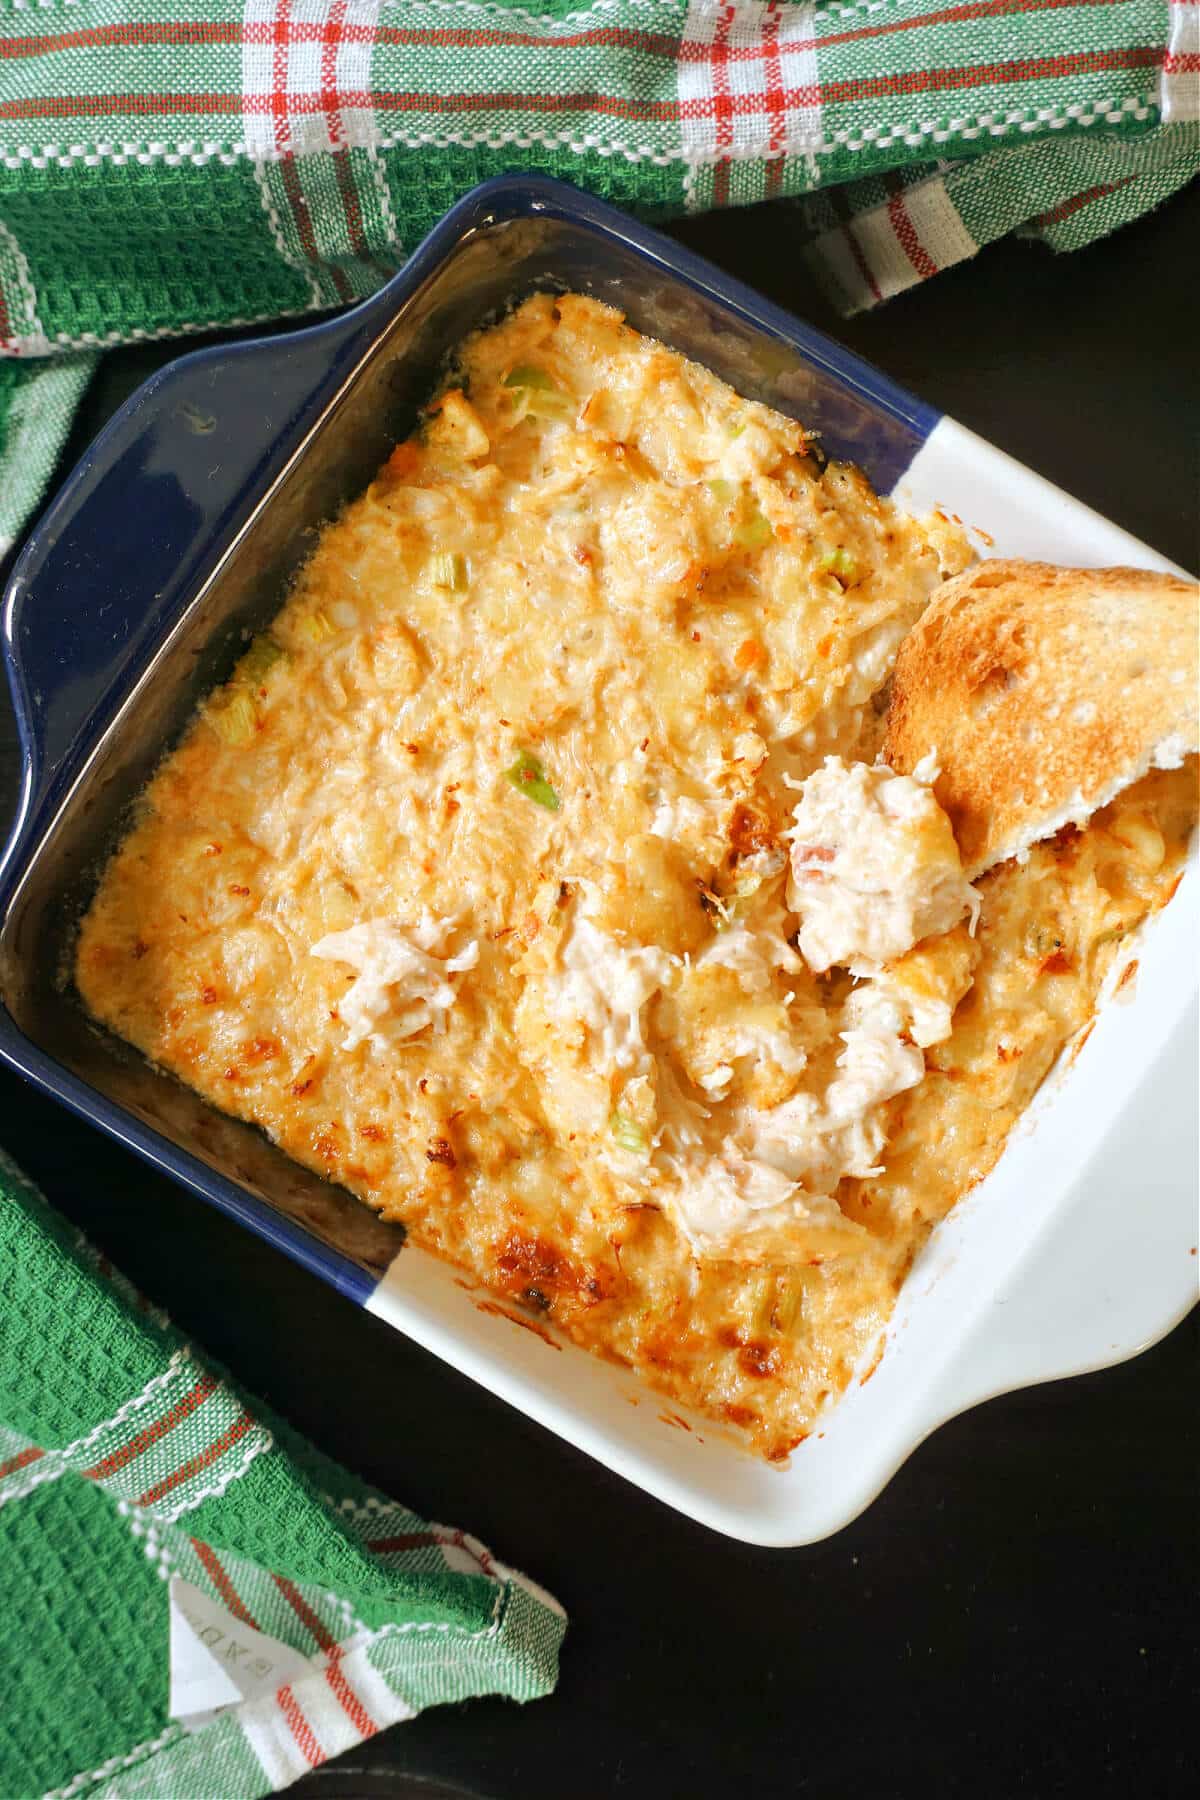 A dish with crab dip.